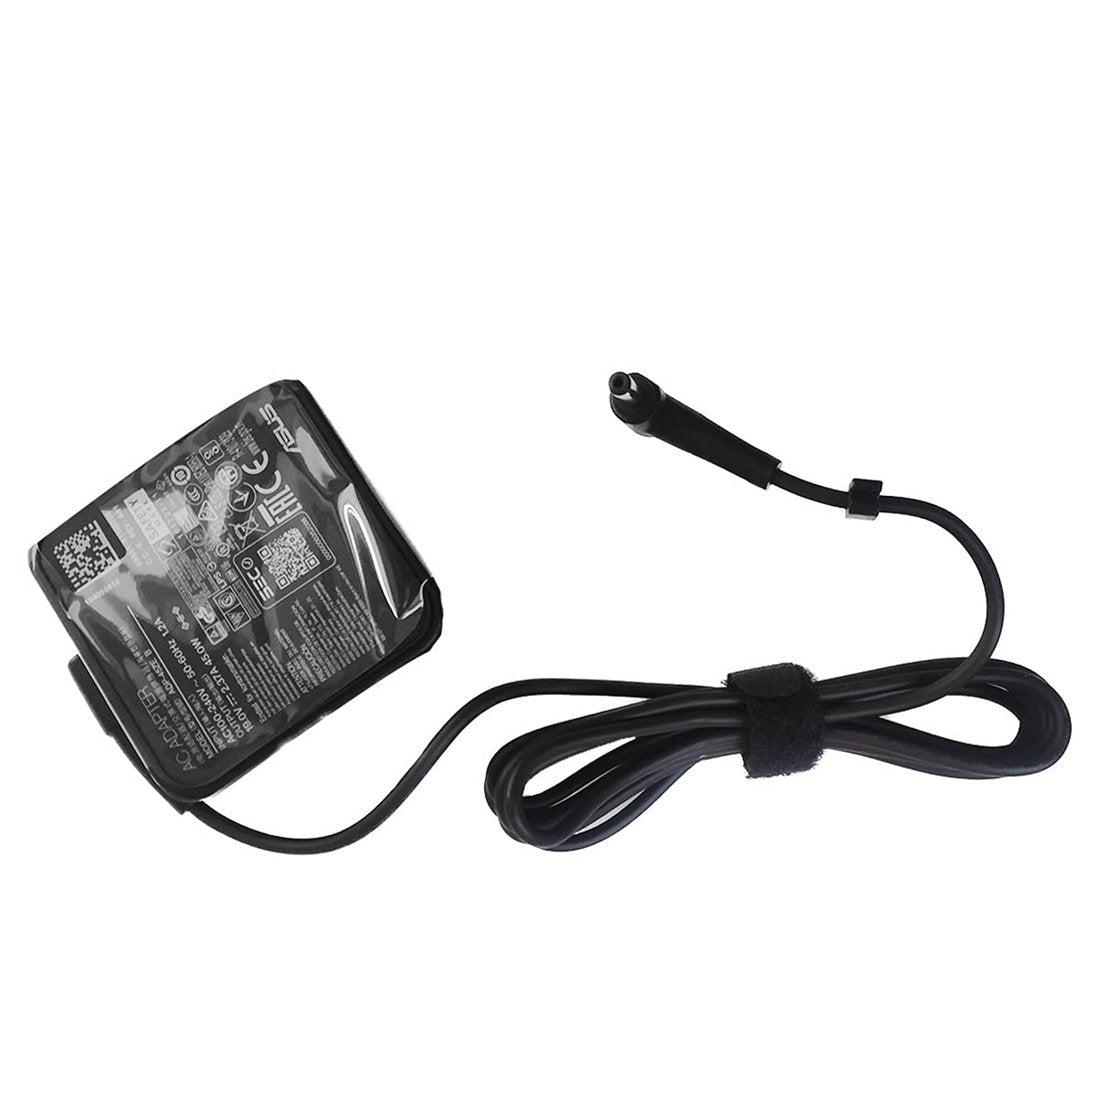 ASUS 45W 4mm Pin Laptop Charger Adapter for VivoBook E402